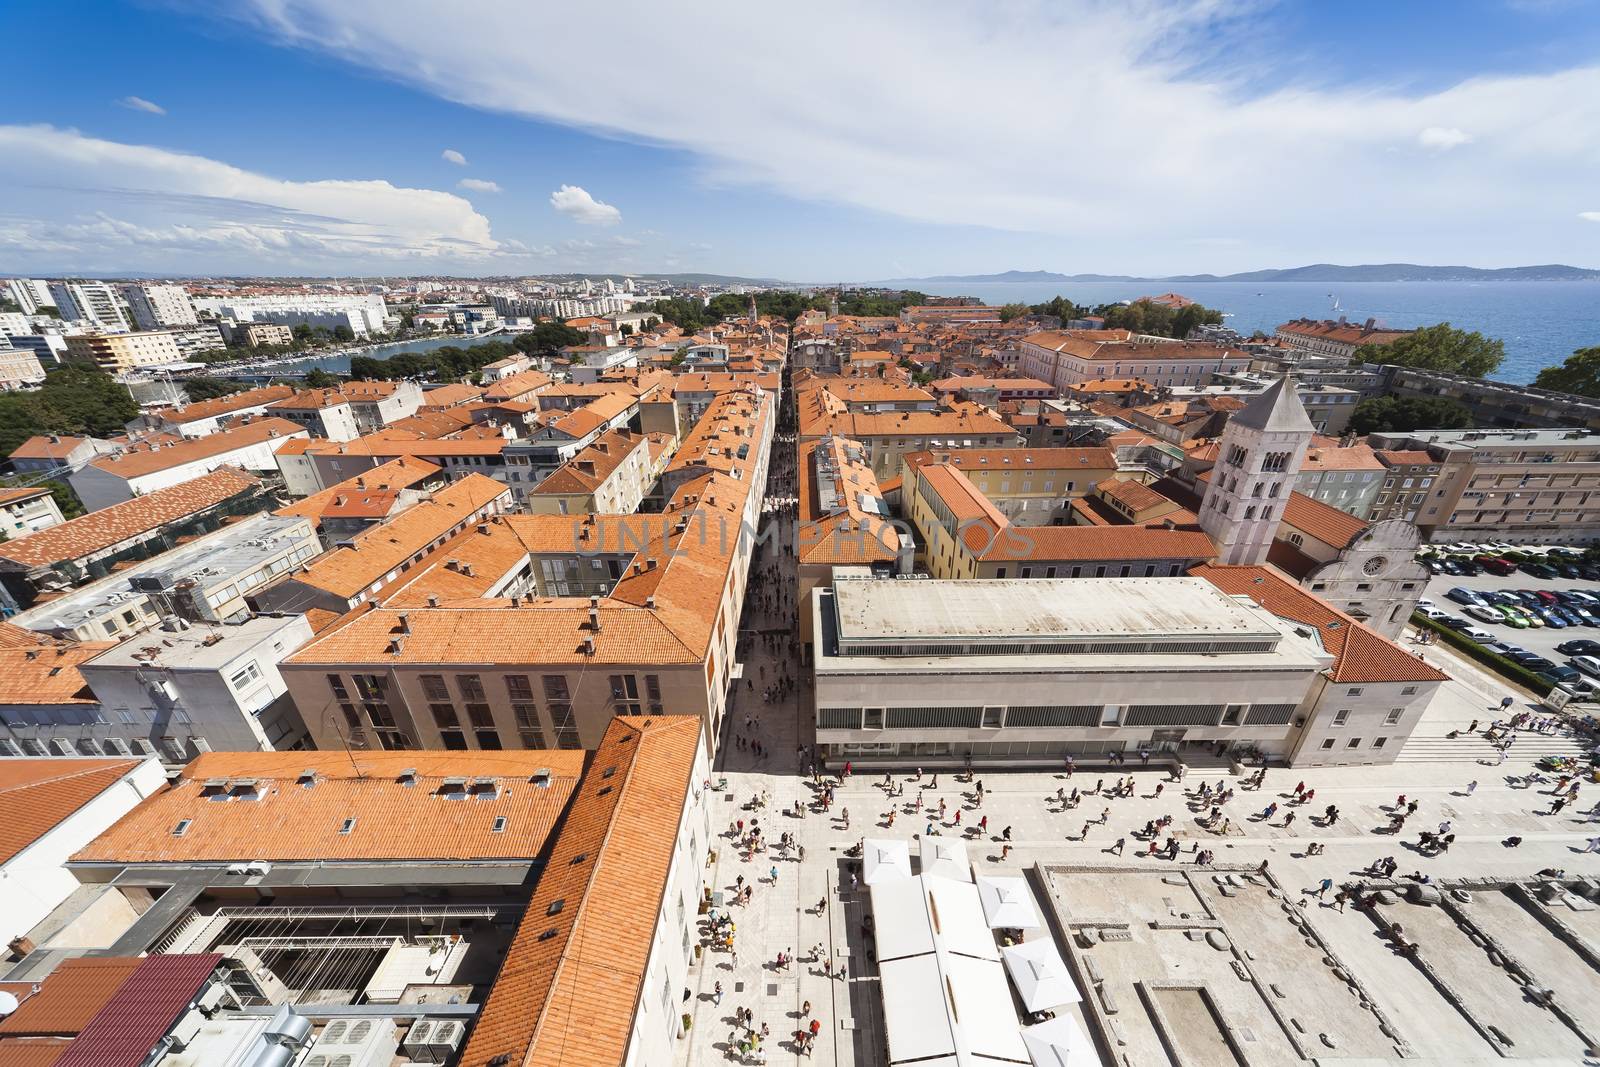 Panorama of Zadar - view from cathedral tower